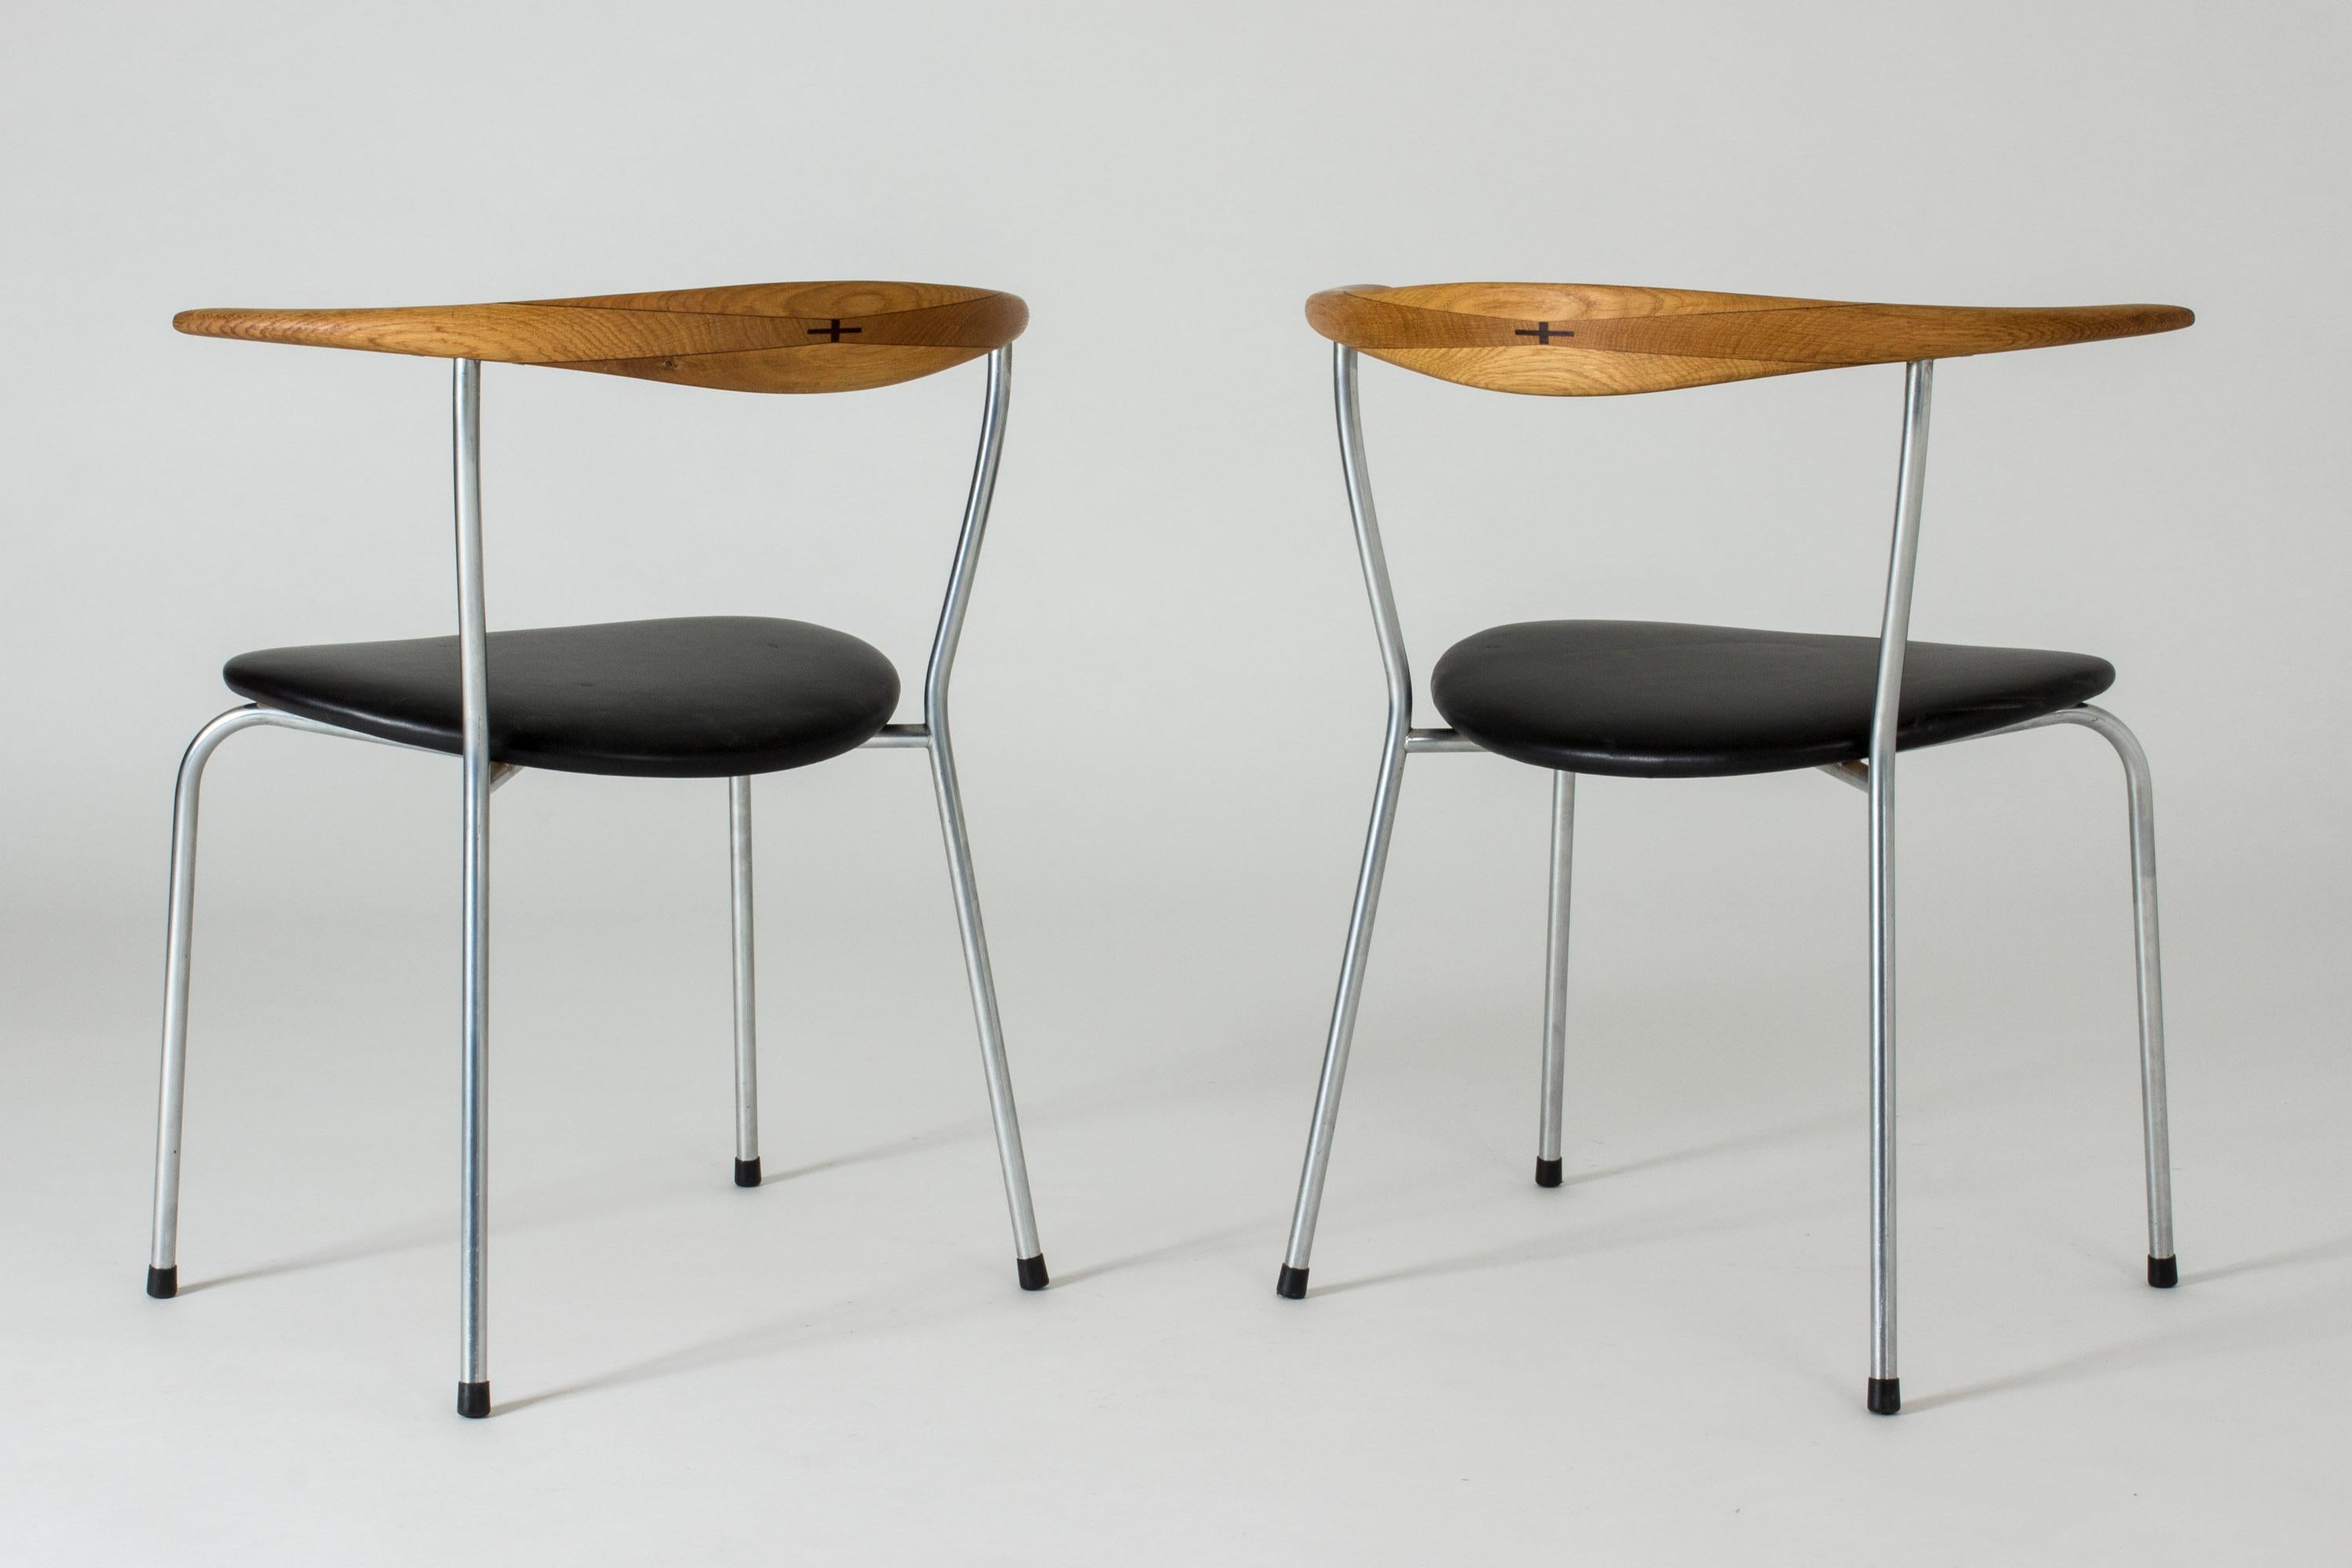 Steel Set of Six “JH 701” Dining Chairs by Hans J. Wegner